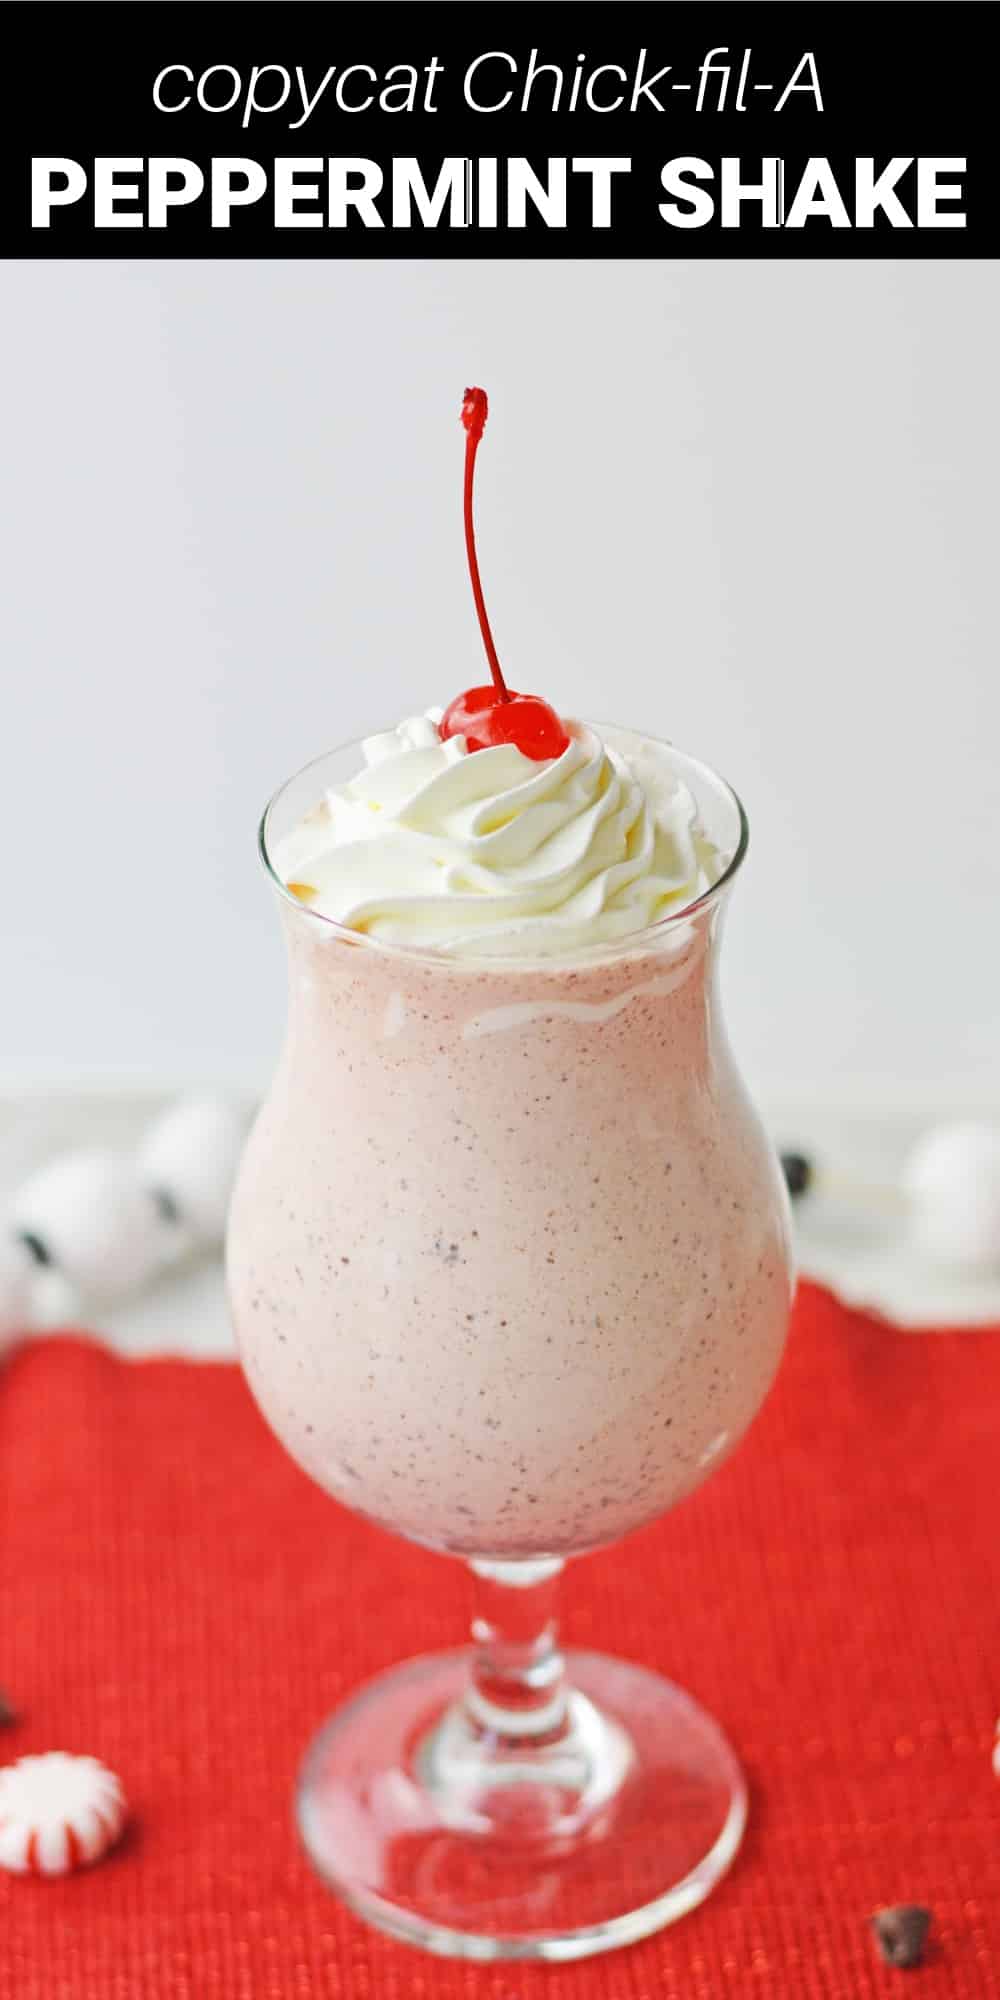 This copycat Chick-fil-A peppermint shake is a delicious treat, and a perfect stand in for the restaurant version that’s only available for a limited time around the holiday season. Rich and creamy vanilla ice cream is blended with cool peppermint extract, crushed candy canes, and sweet chocolate chips for a thick and delicious shake that you can make any time you want.